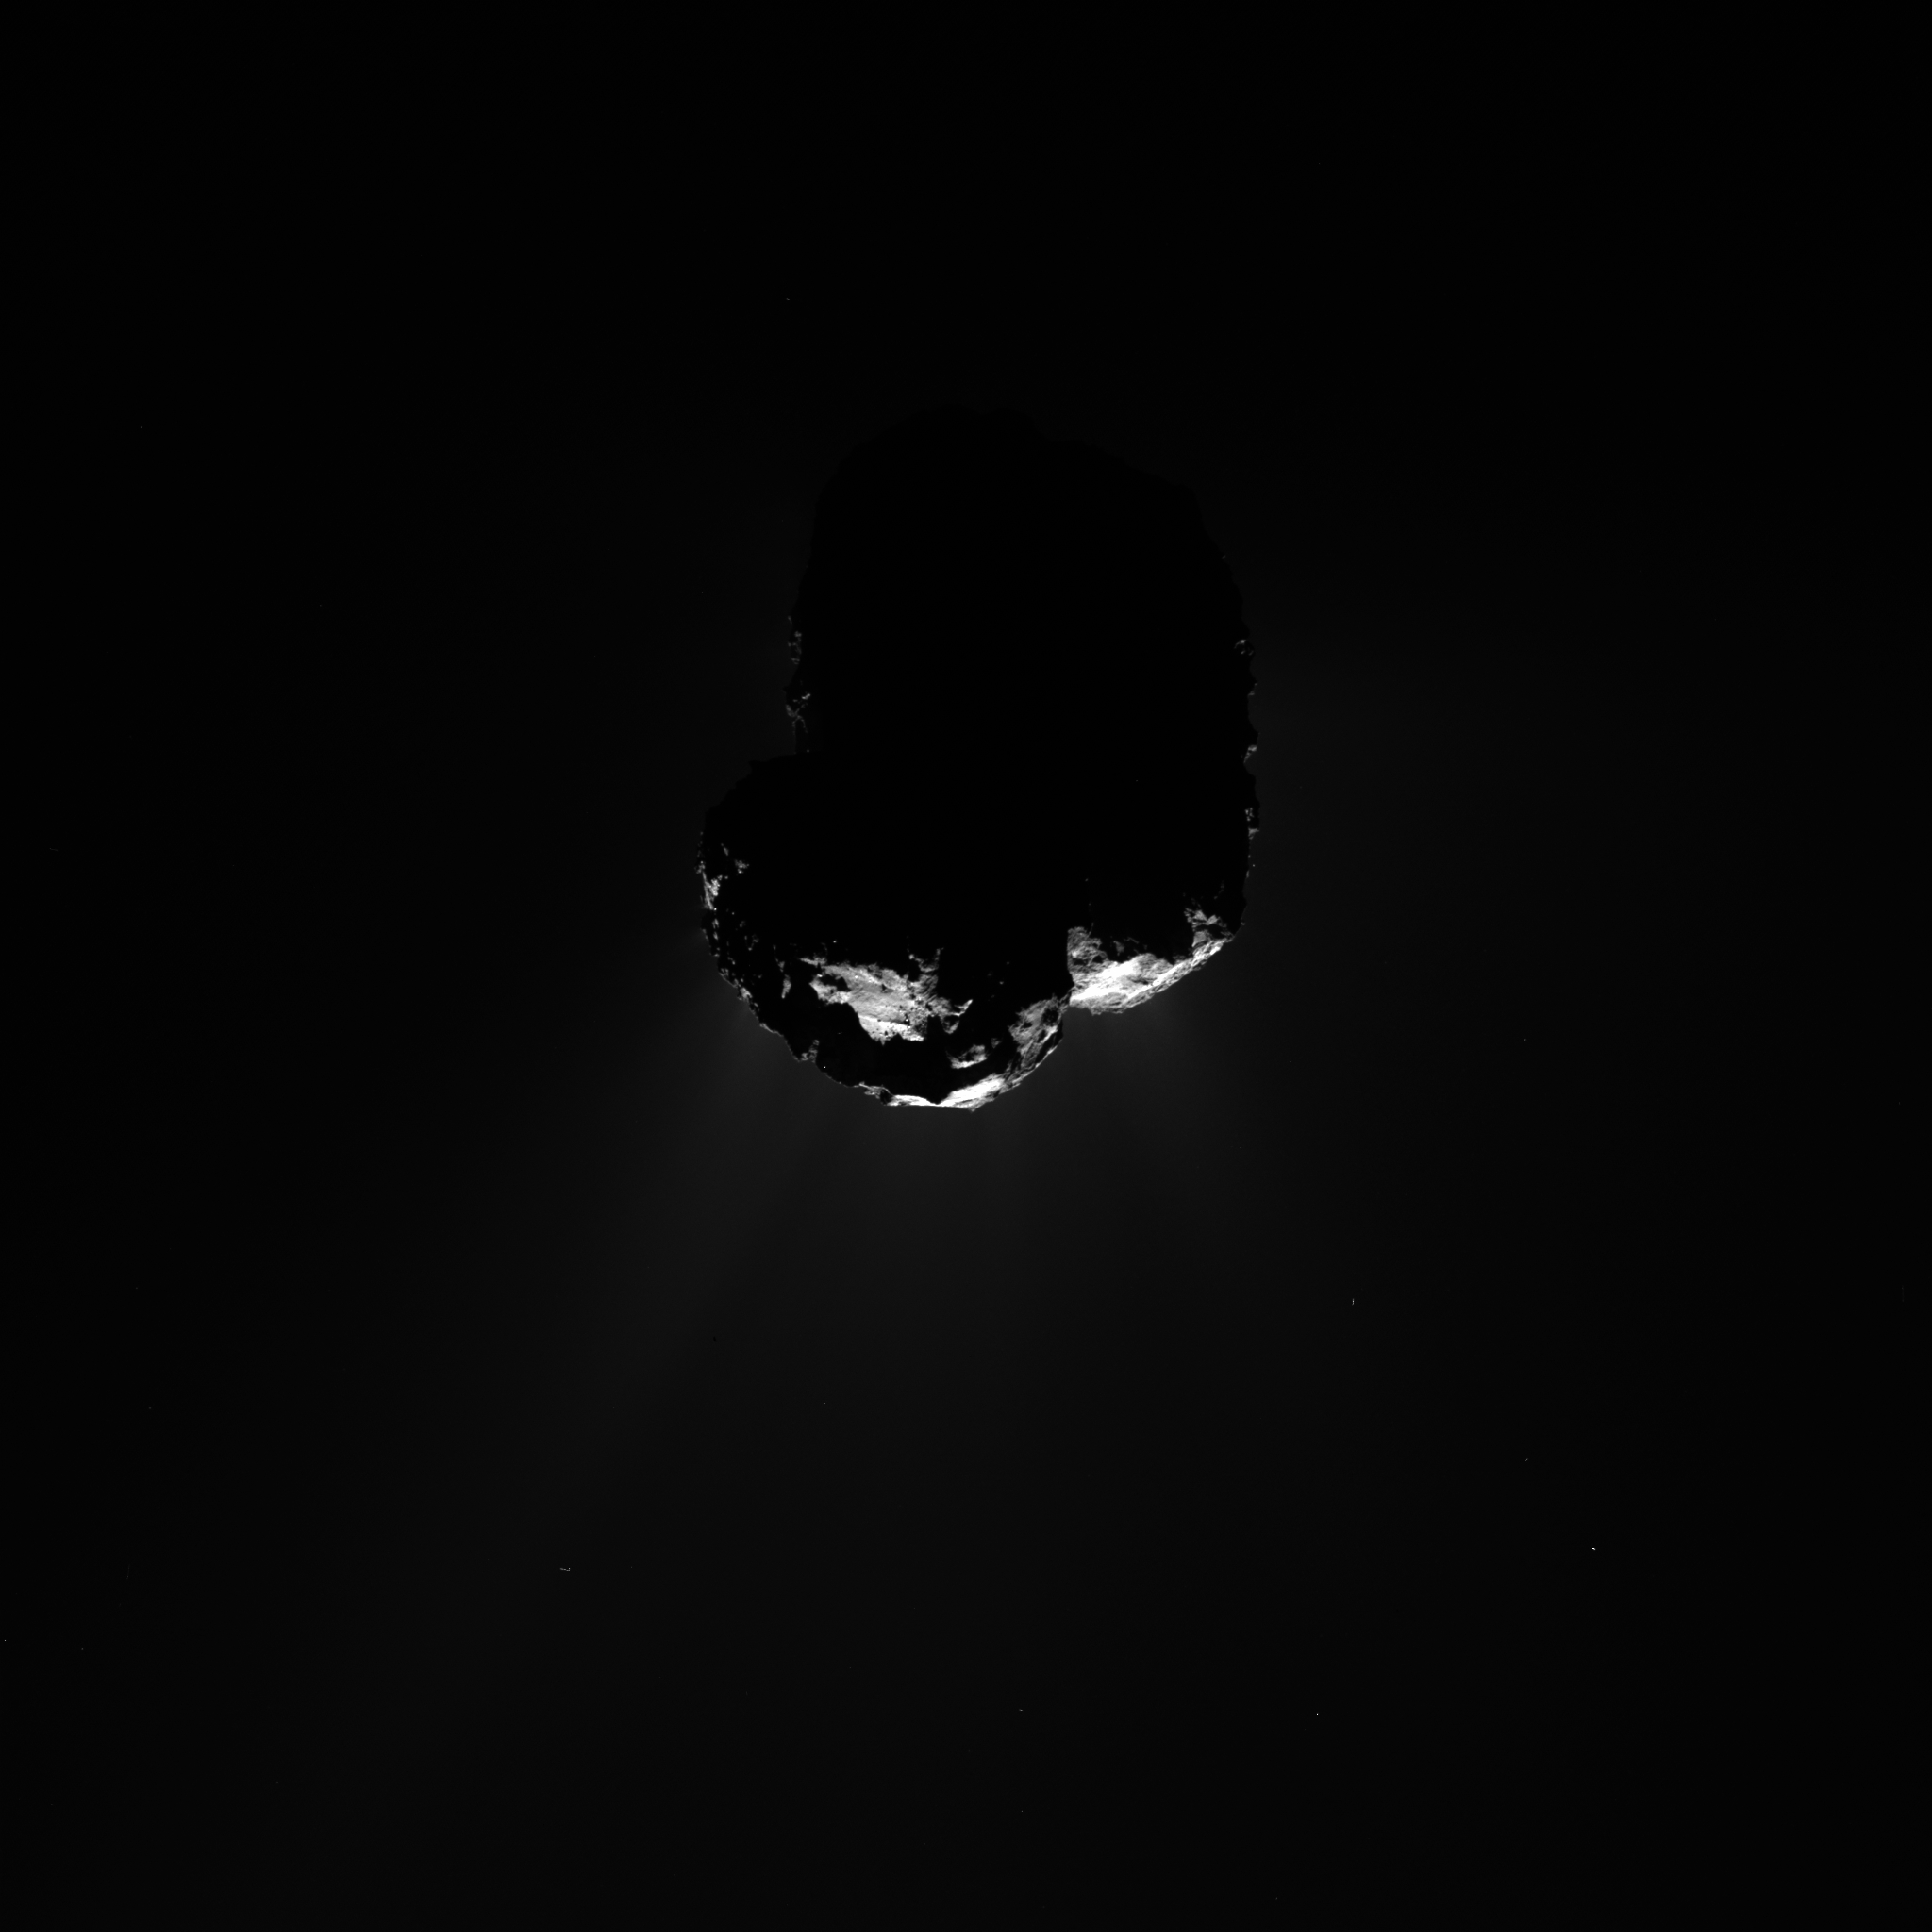 A comet outburst seen by ESA's Rosetta mission